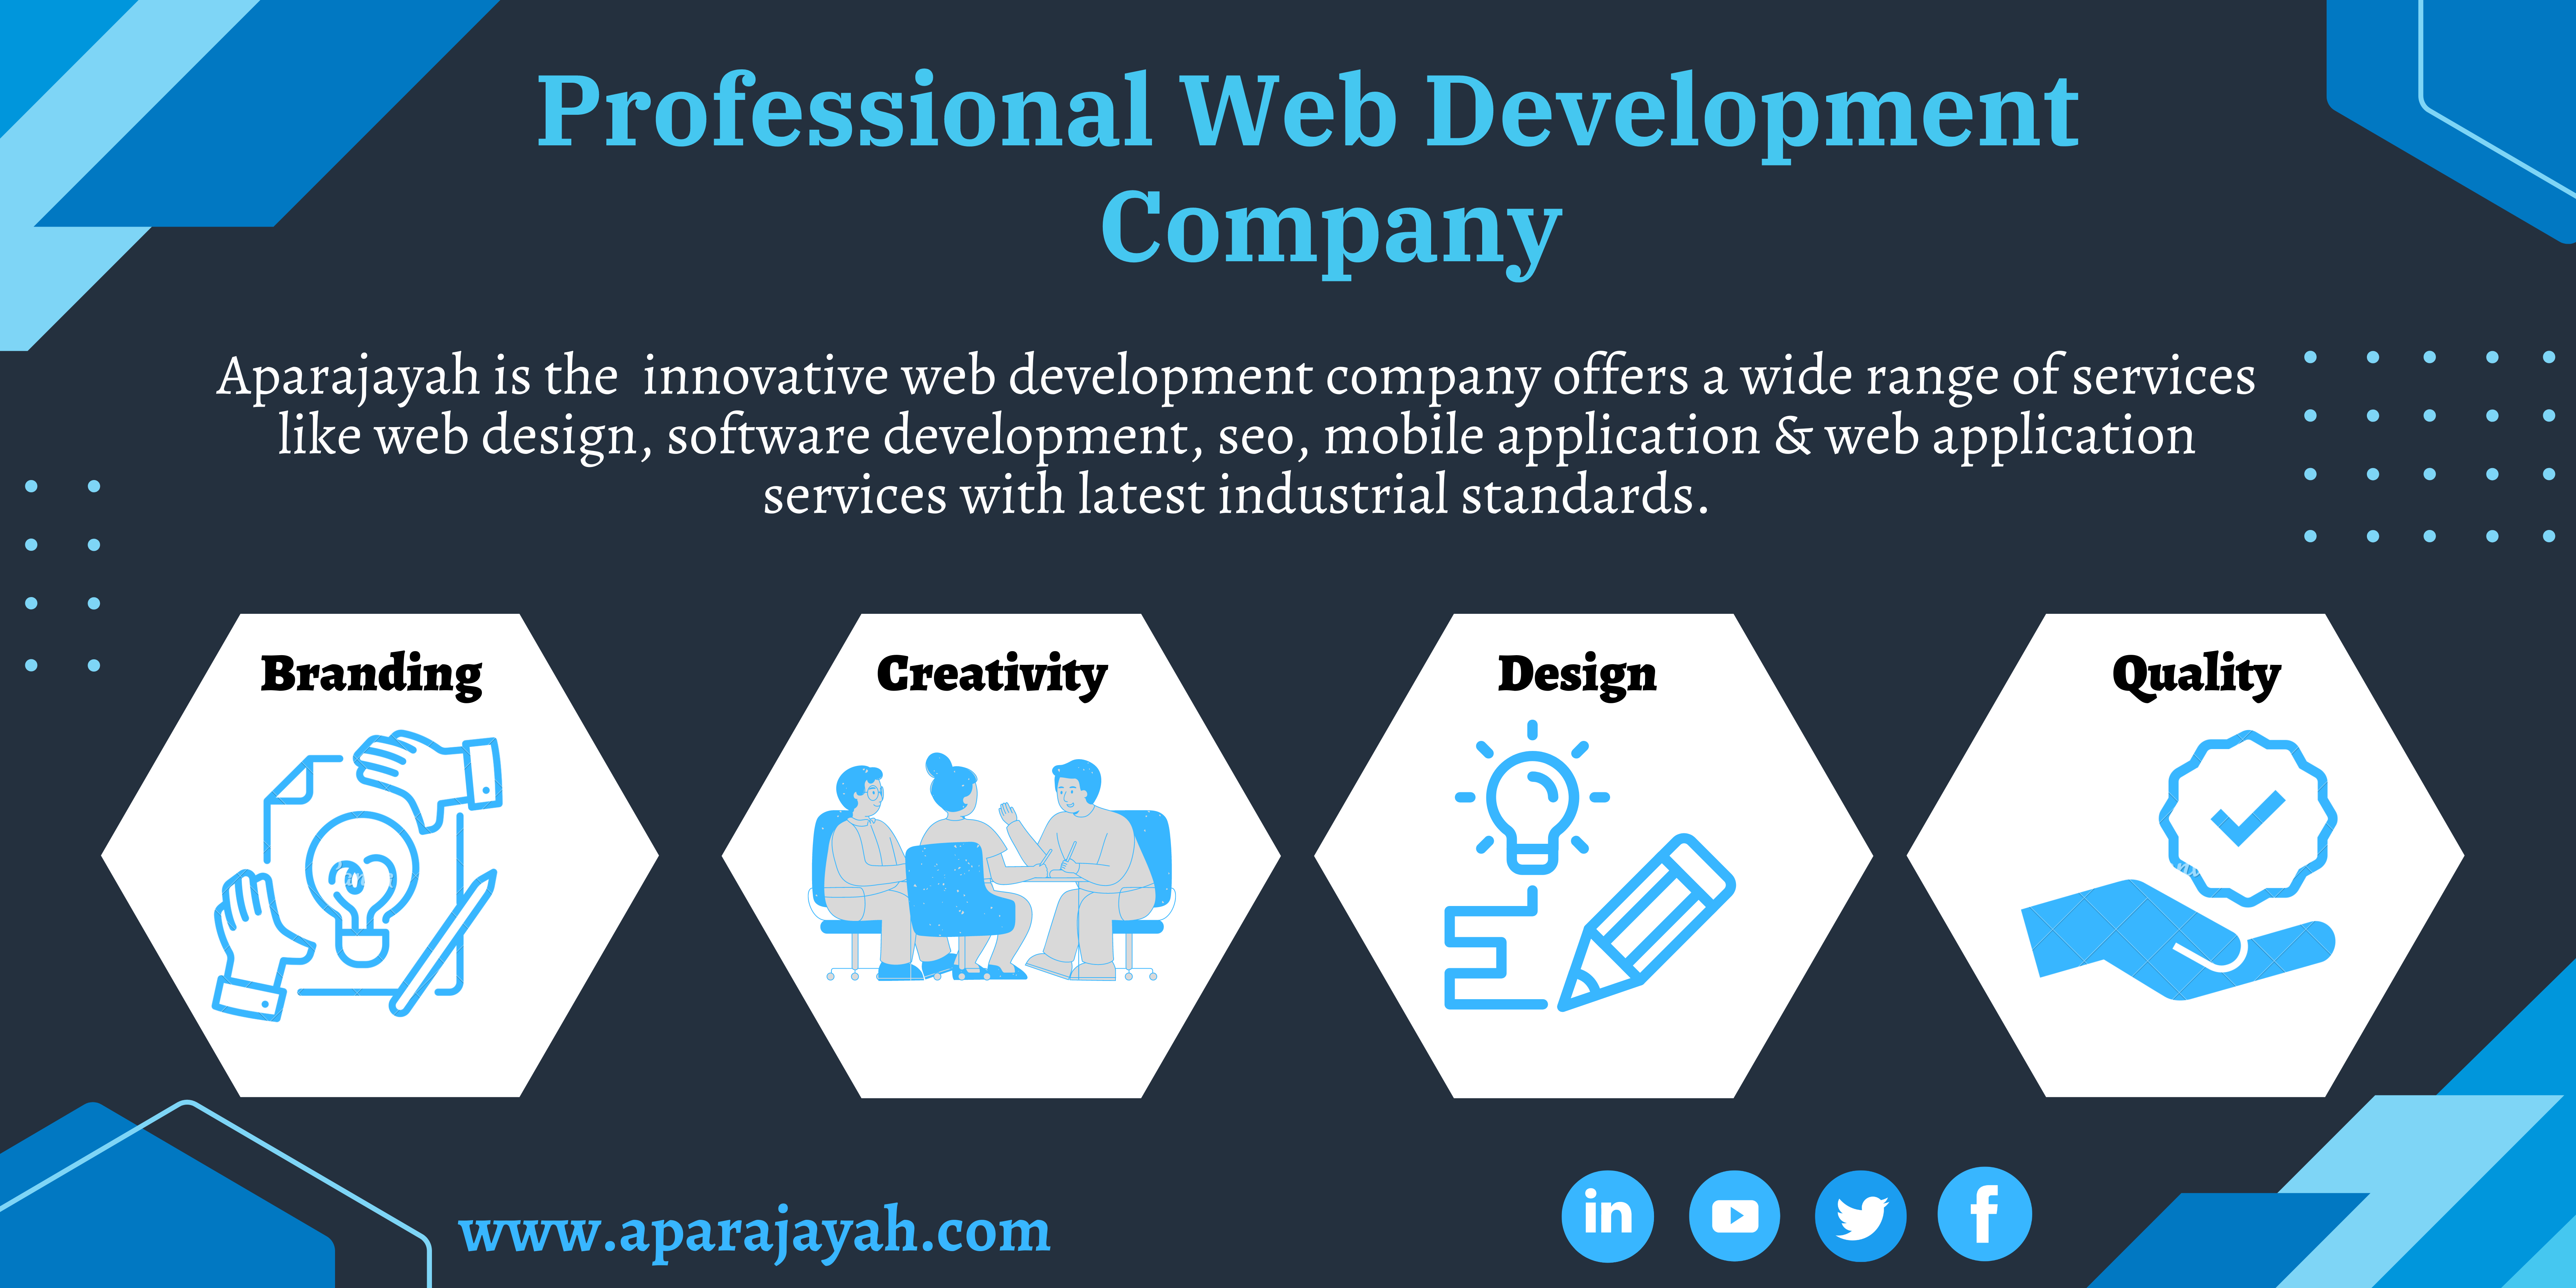 Web Development Company - Aparajayah|Accounting Services|Professional Services